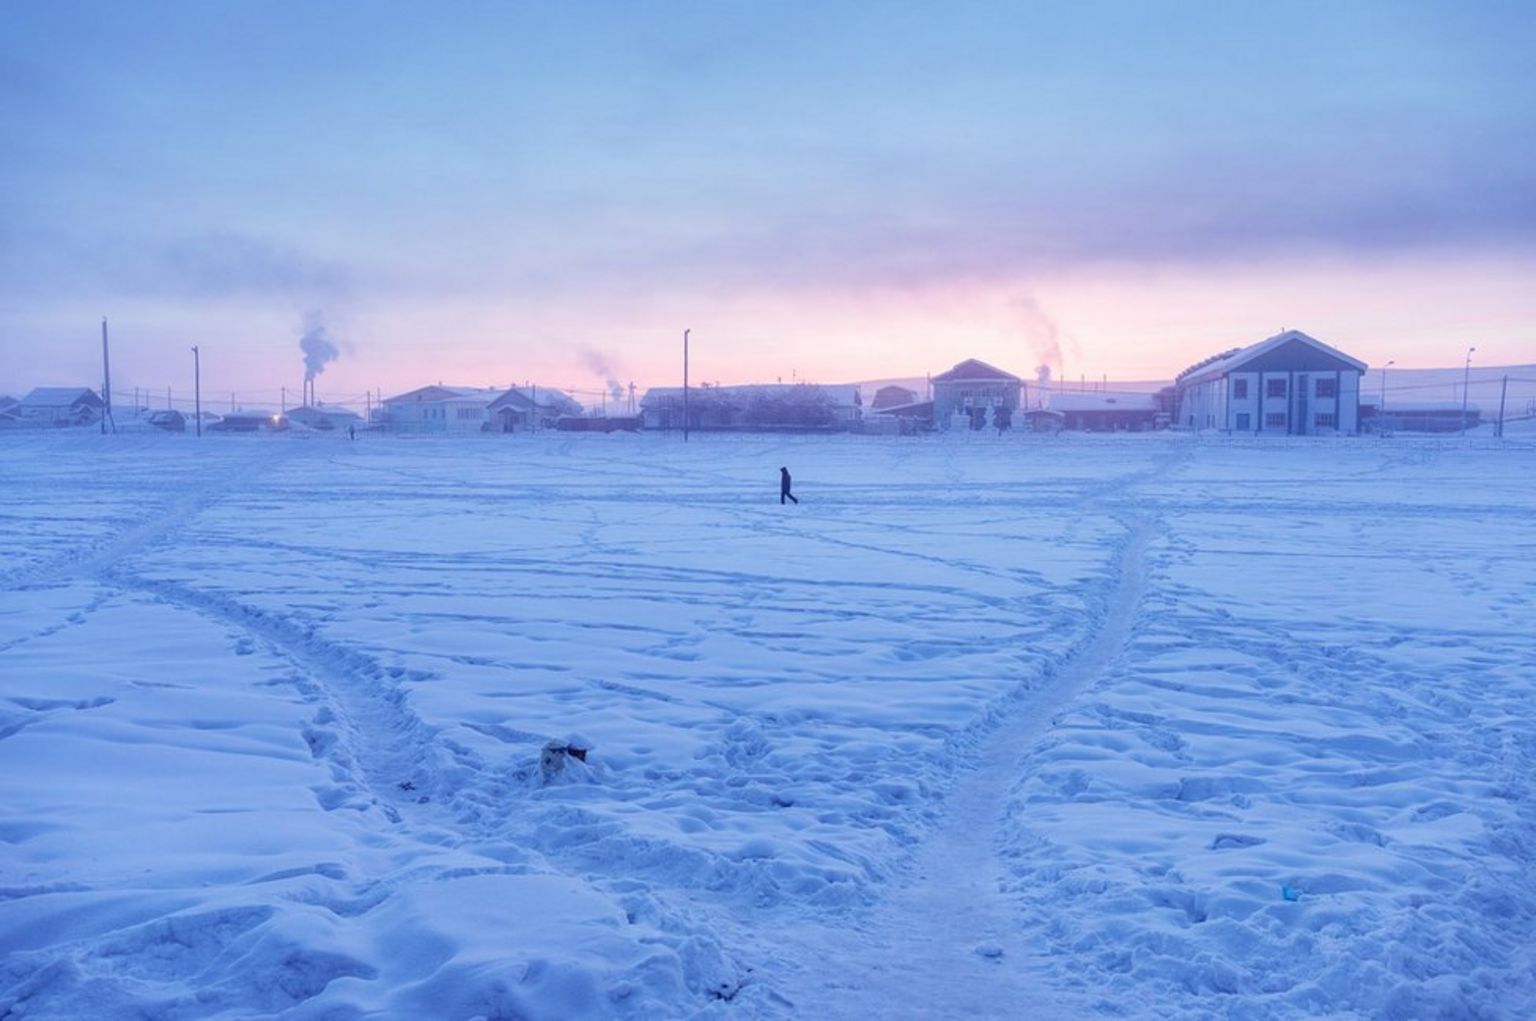 A man walks in the village at sunrise. The climatic factor is here omnipresent: in February 1892, the lowest temperature in the world (Antarctica not included) was recorded in Verkhoyansk. And if the village is fighting over the title of the coldest village in the world with Oymyakon, it nevertheless holds the record of the greatest temperature range on Earth: 105°C (189°F) with -67,8°C in winter and 37,3°C in summer.